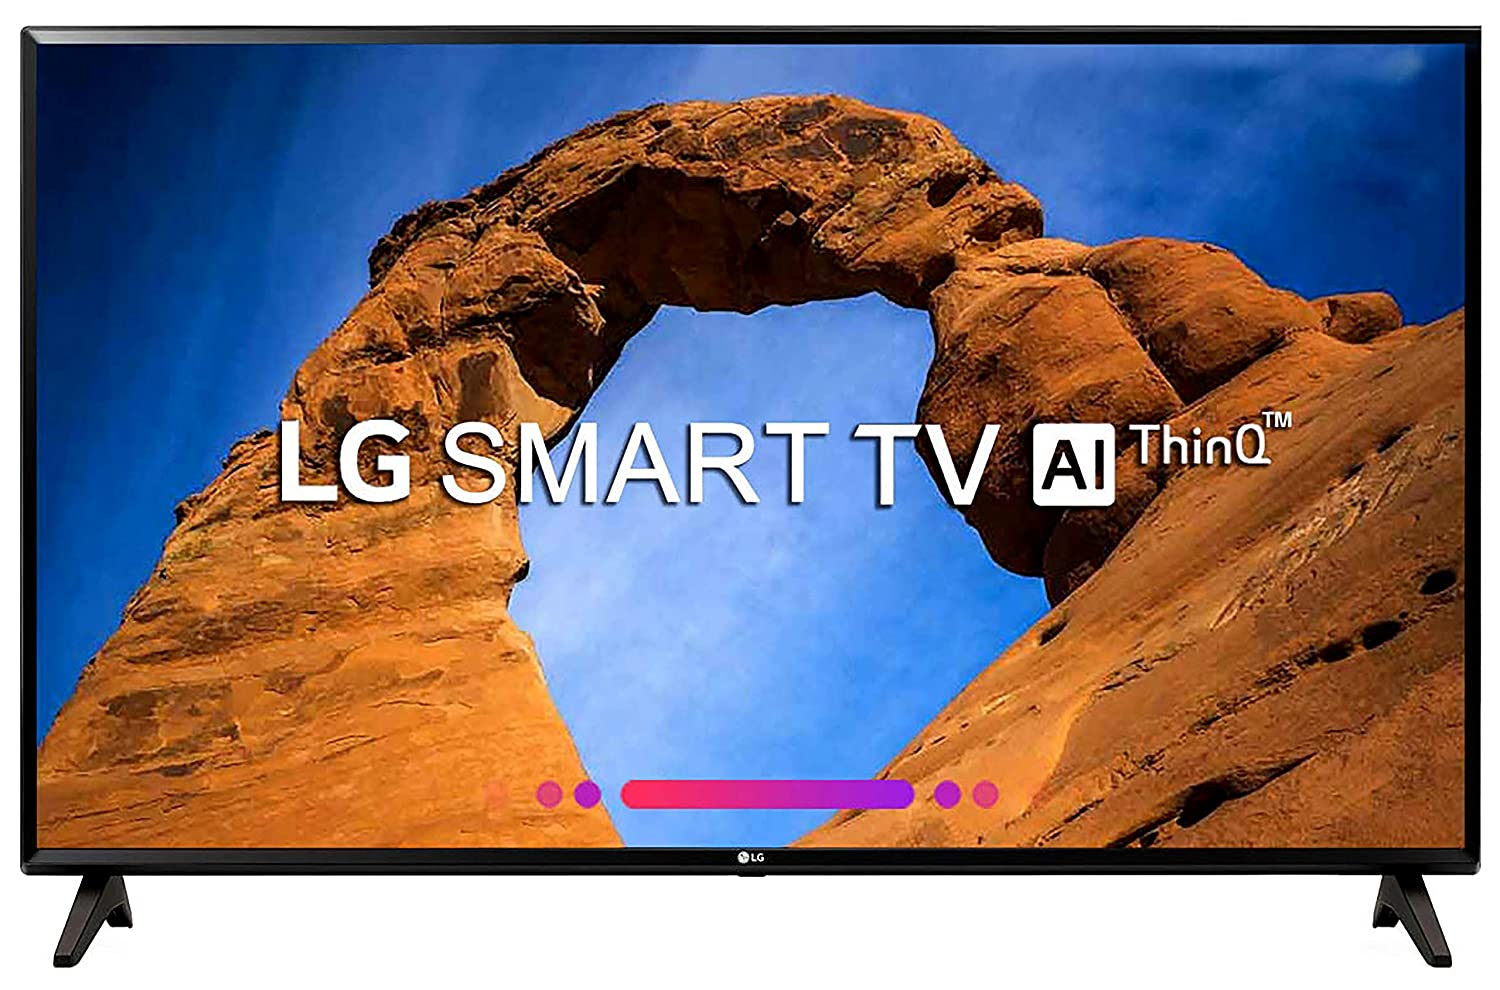 How to Clear Cache on LG Smart TV